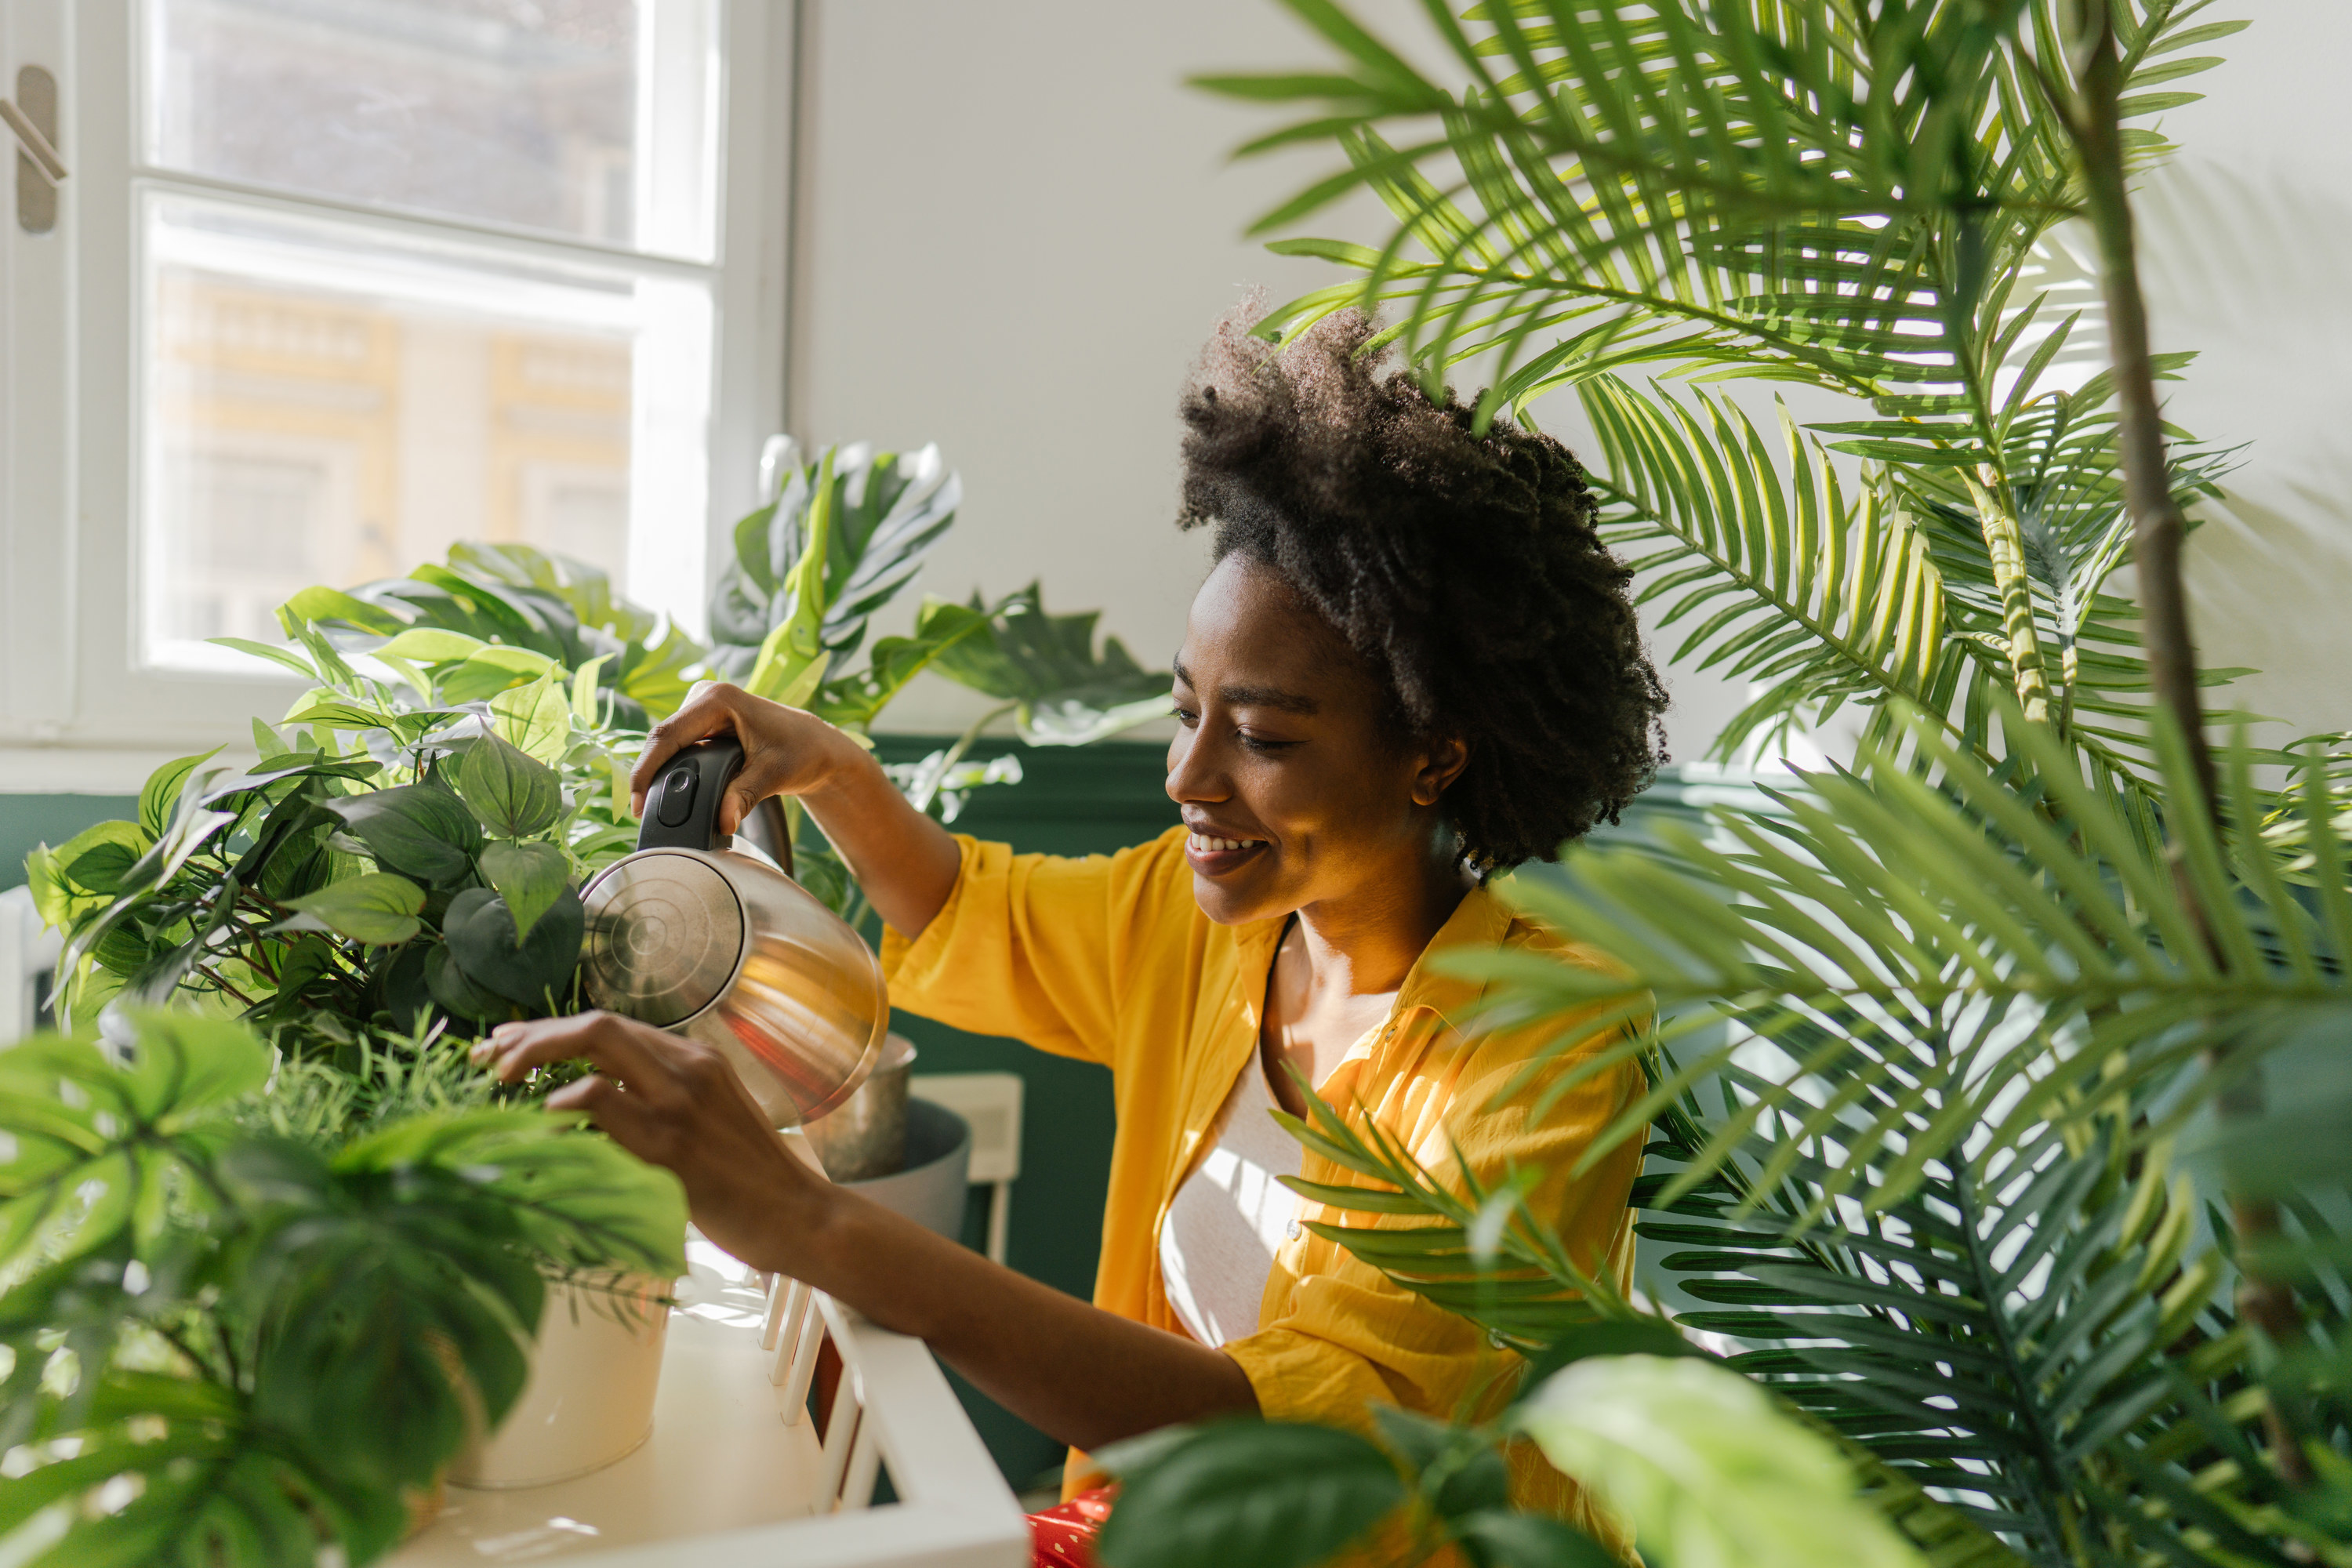 Woman watering numerous houseplants in a bright room